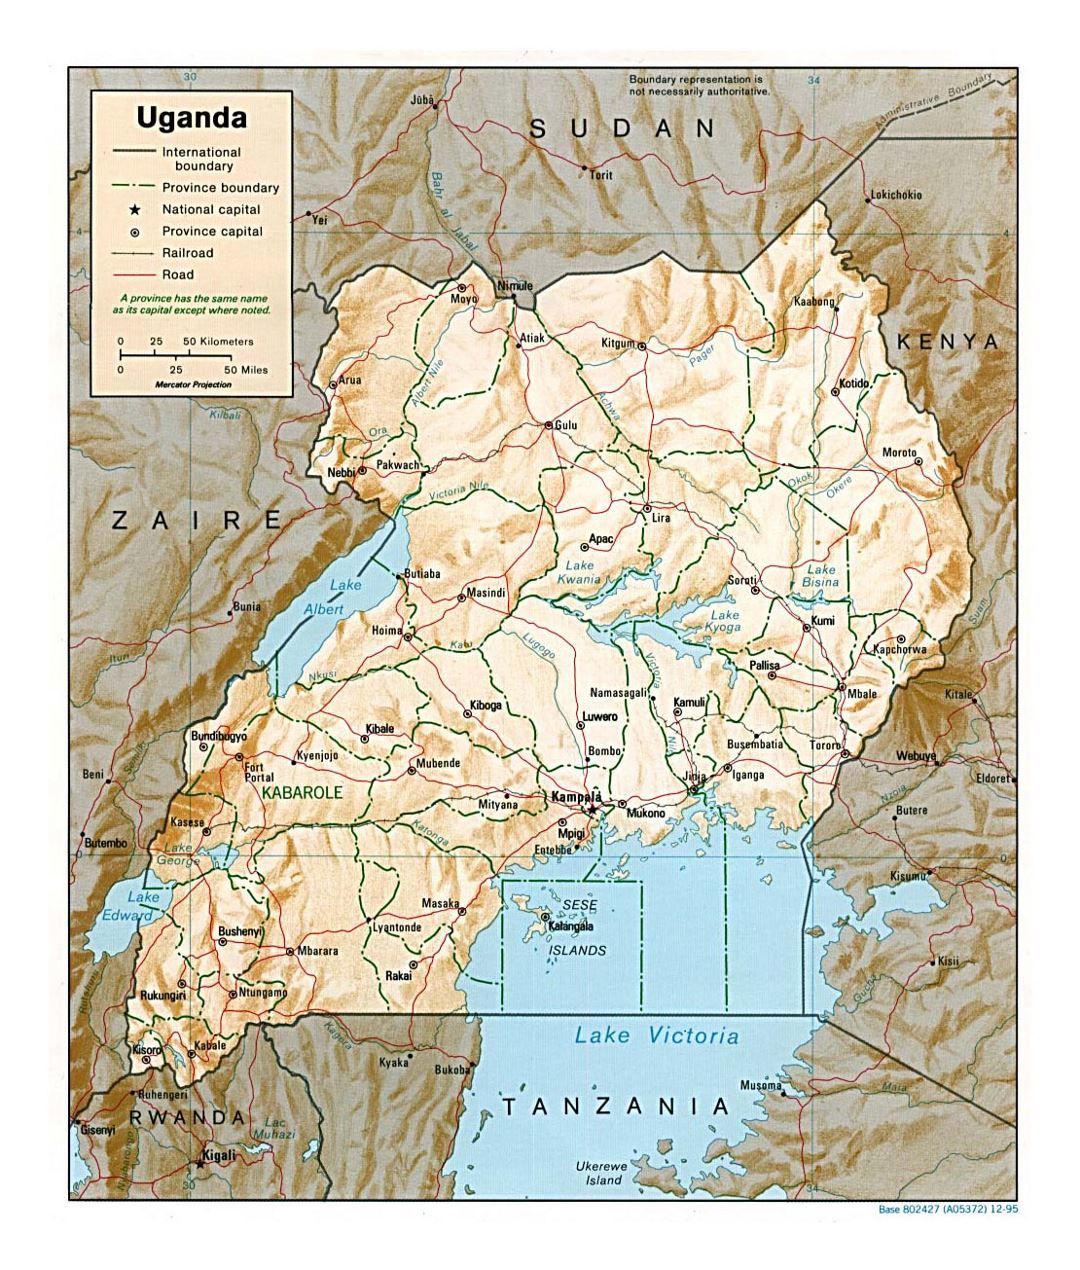 Detailed political and administrative map of Uganda with relief, roads, railroads and major cities - 1995